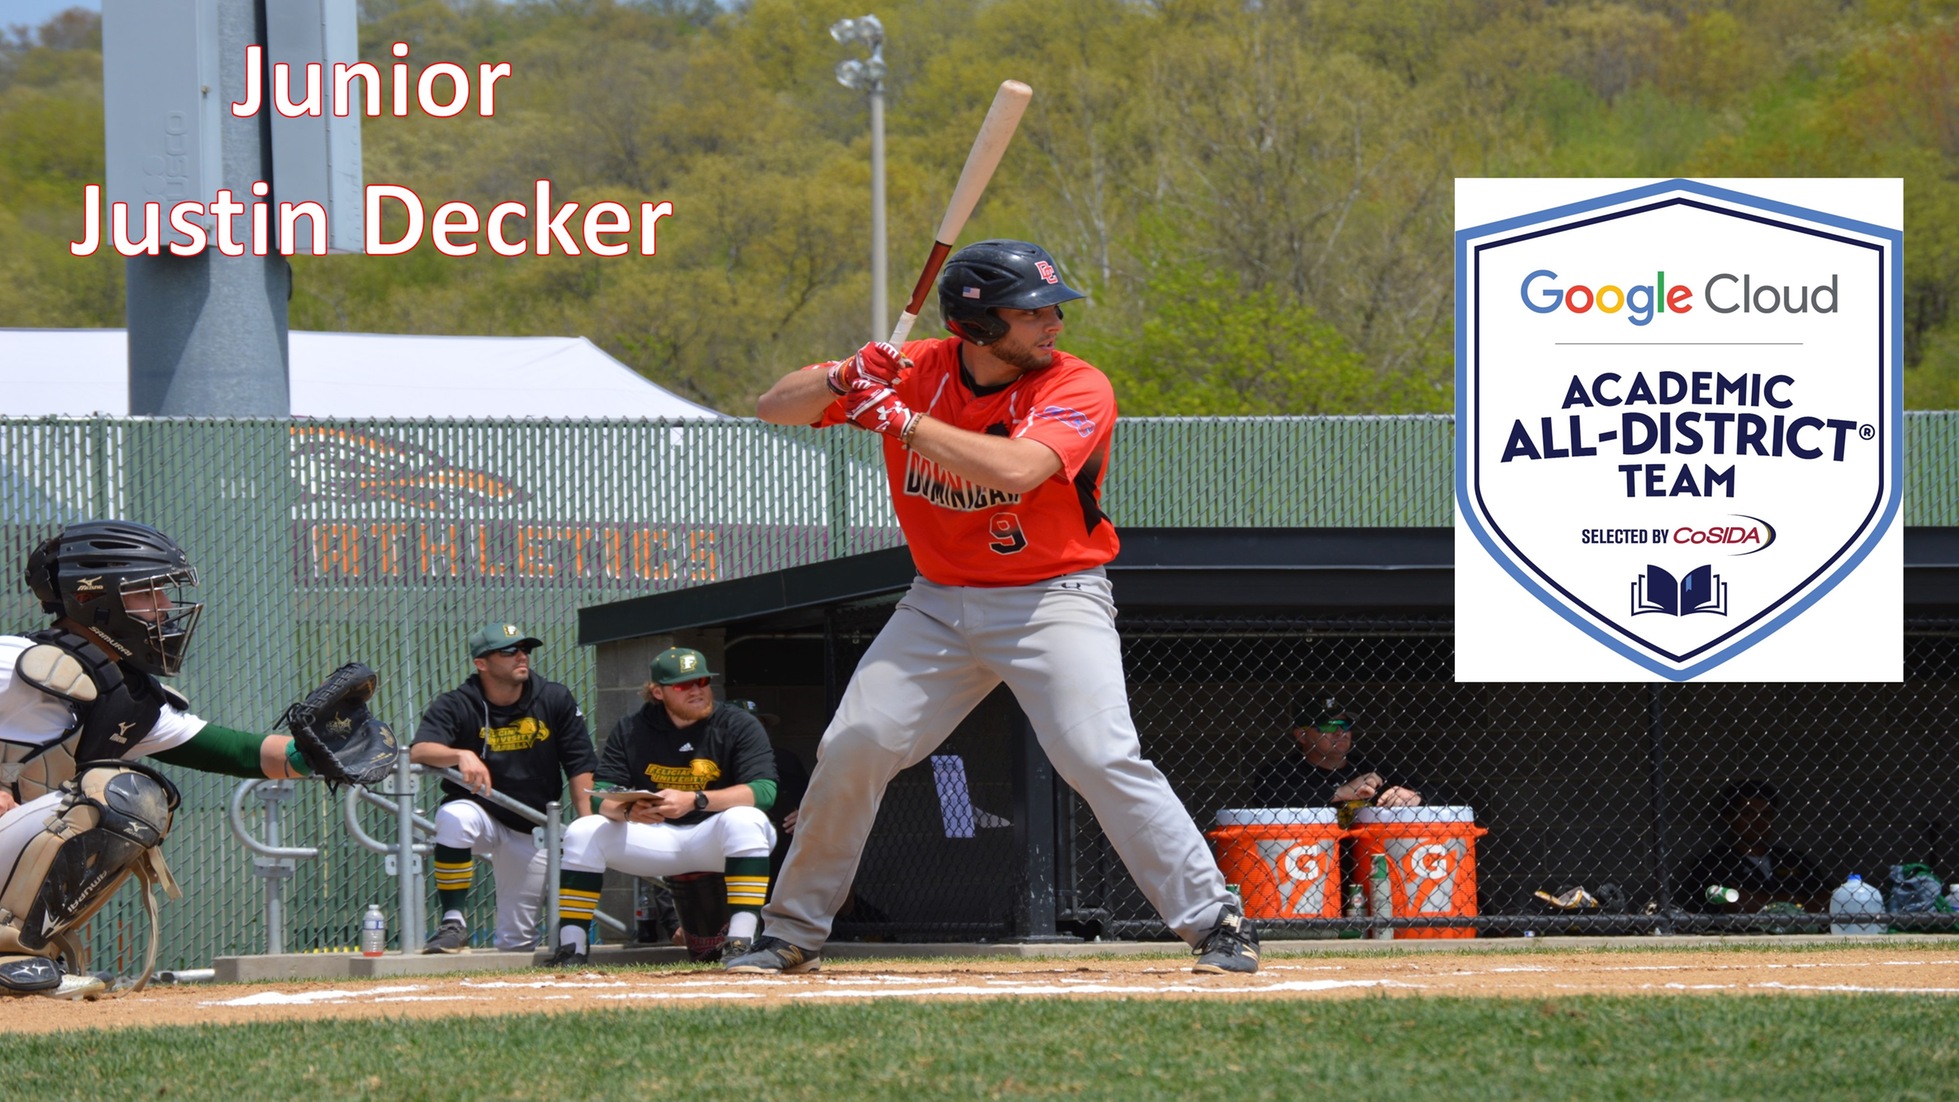 Dominican College baseball player, Justin Decker, has been named to the Google Cloud Academic All-District First Team.